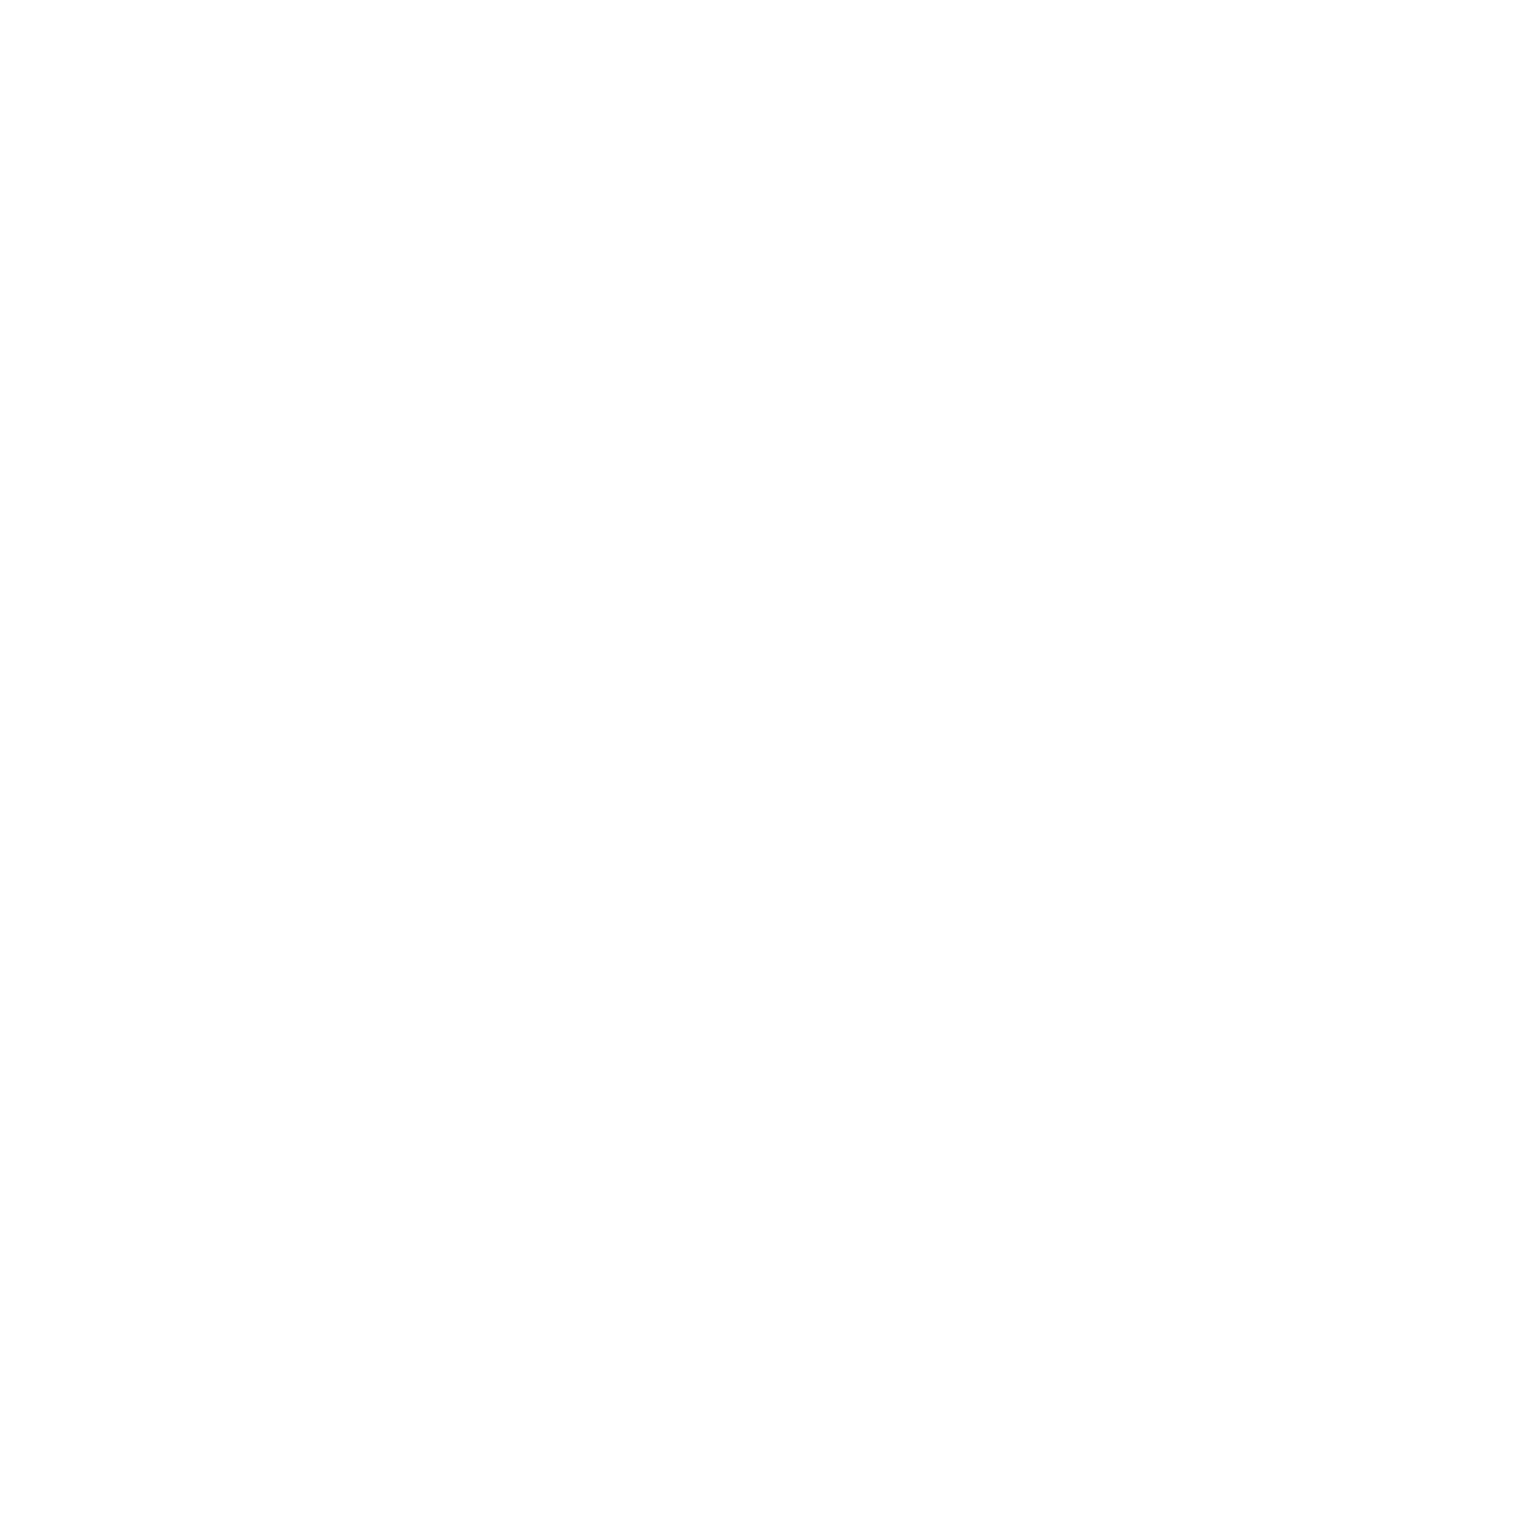 Tianqi Lithium logo for dark backgrounds (transparent PNG)